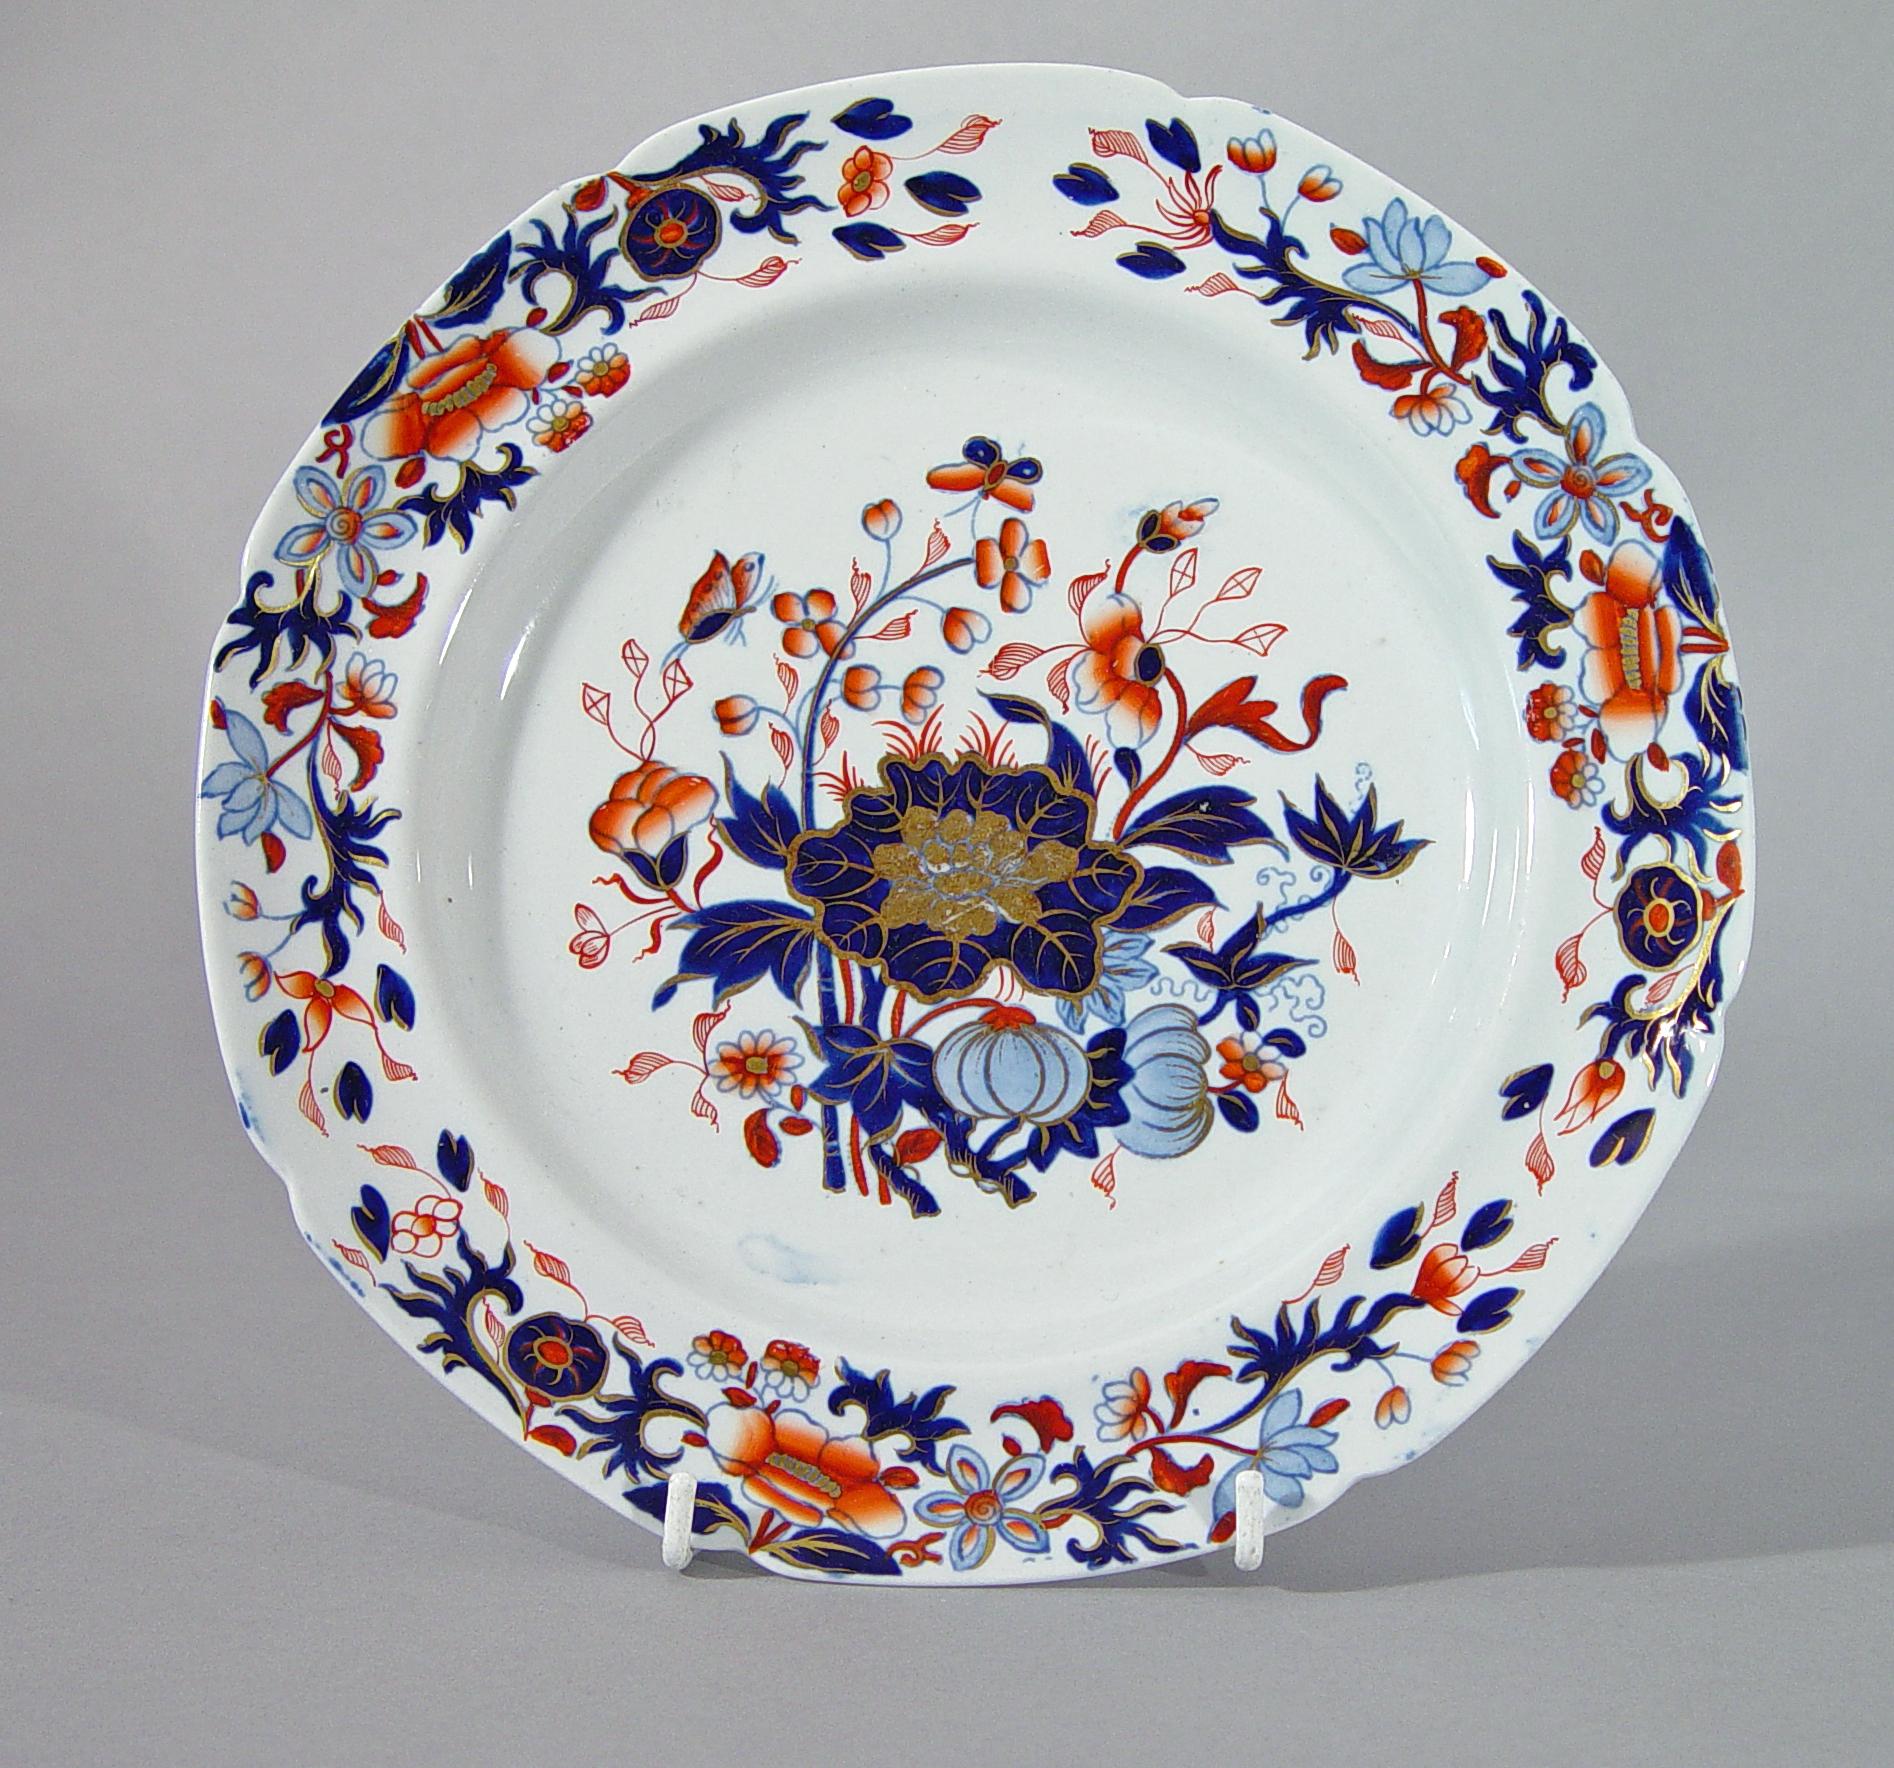 Spode New Stone China Dinner Service- Eighty Four Pieces,
Pattern #3504,
Circa 1820

The service is decorated in an Imari pattern in iron red light and dark blue and gold of a stand of bamboo and other plants in the centre of the plates with a band